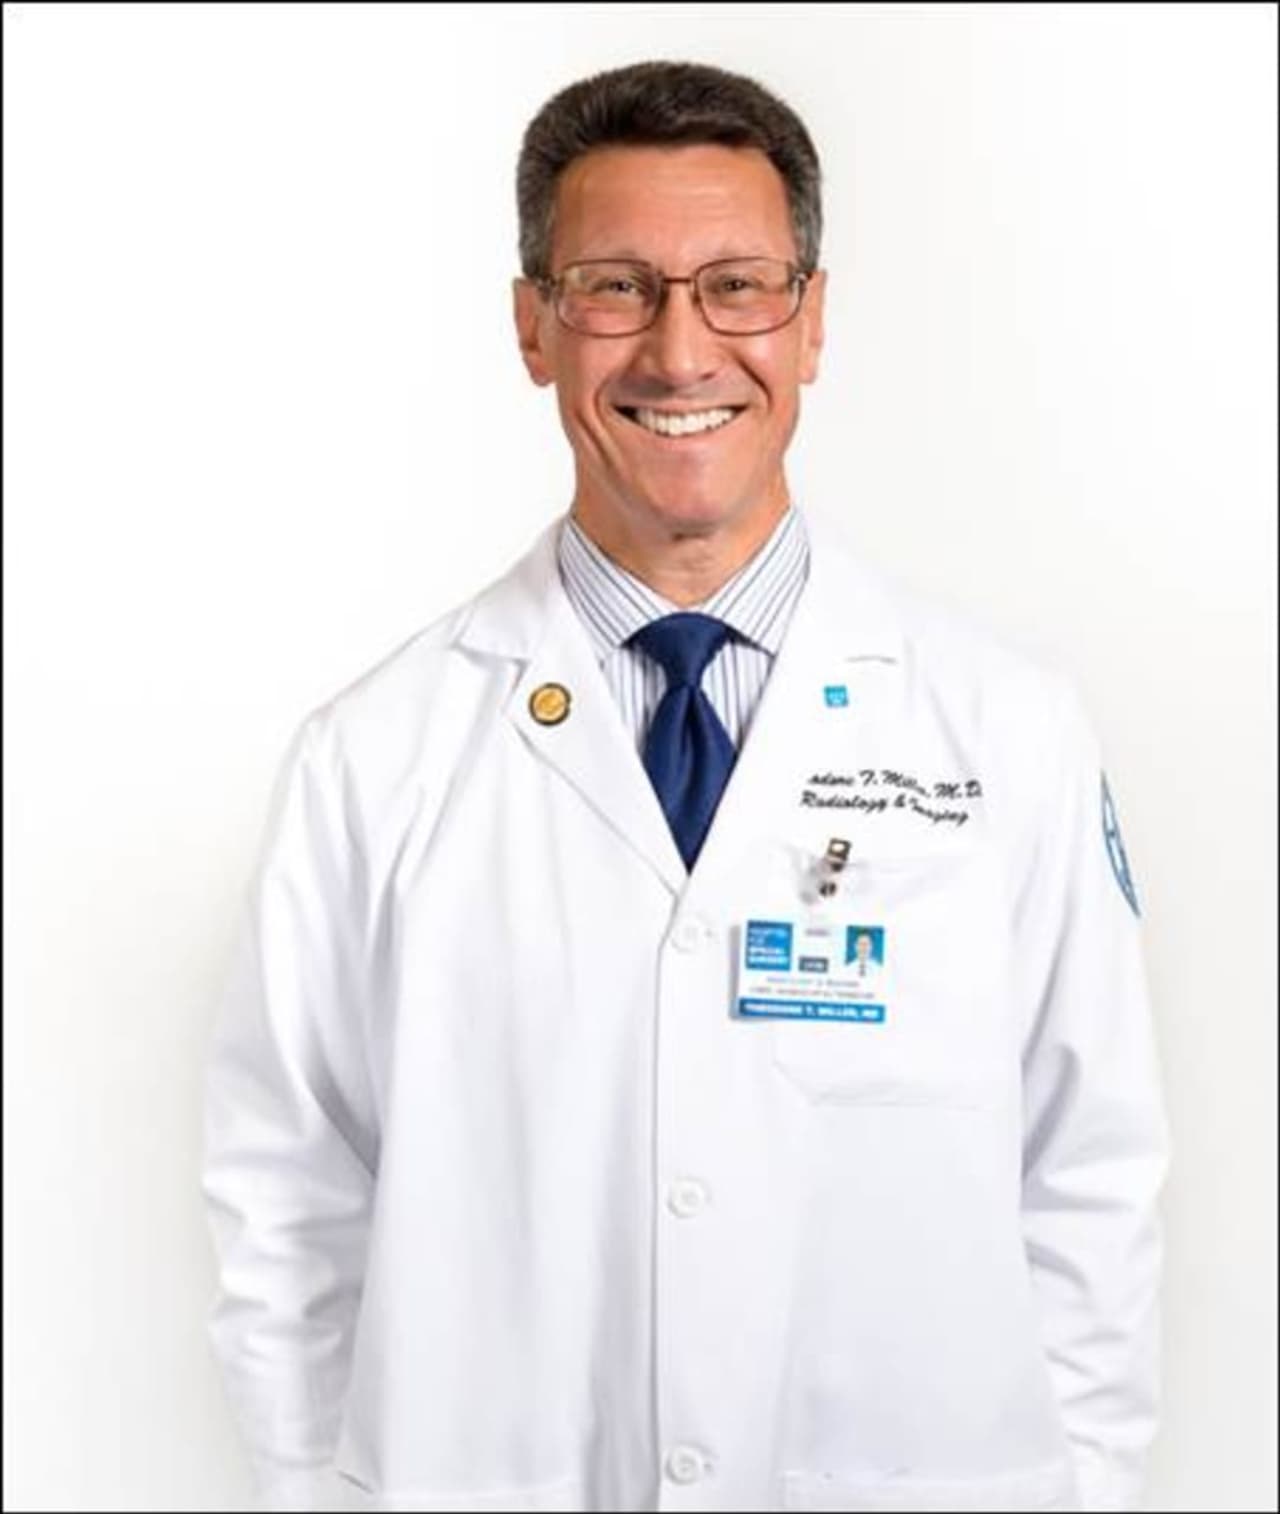 Theodore Miller, MD, FACR, Chief, Division of Ultrasound at HSS.